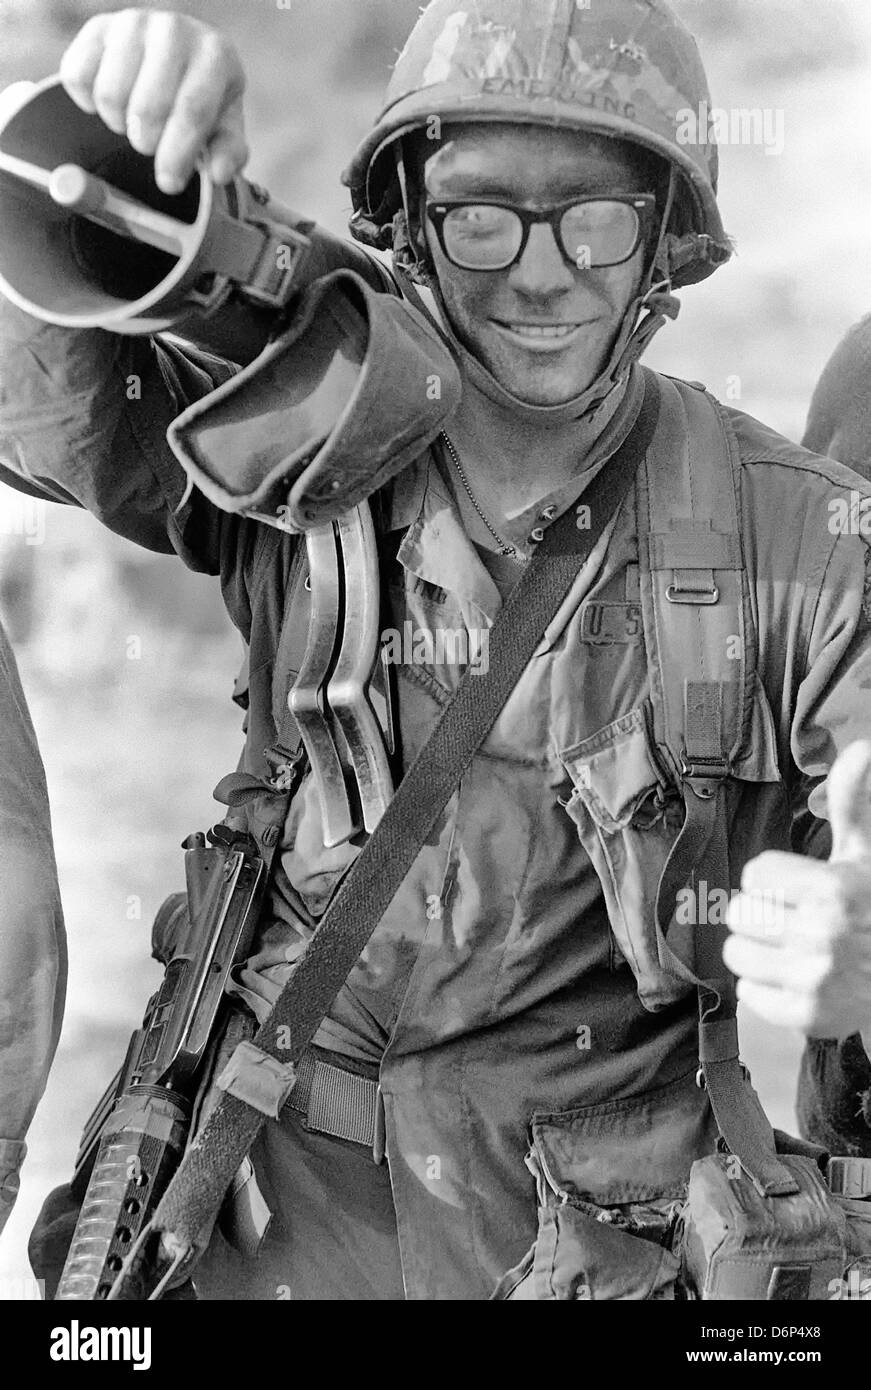 A US infantryman carries a 90mm M67 recoilless rifle during the Invasion of Grenada, codenamed Operation Urgent Fury November 9, 1983 in St Georges, Grenada. The invasion began on October 25, 1983 and was the first major military action by the United States since the end of the Vietnam War. Stock Photo